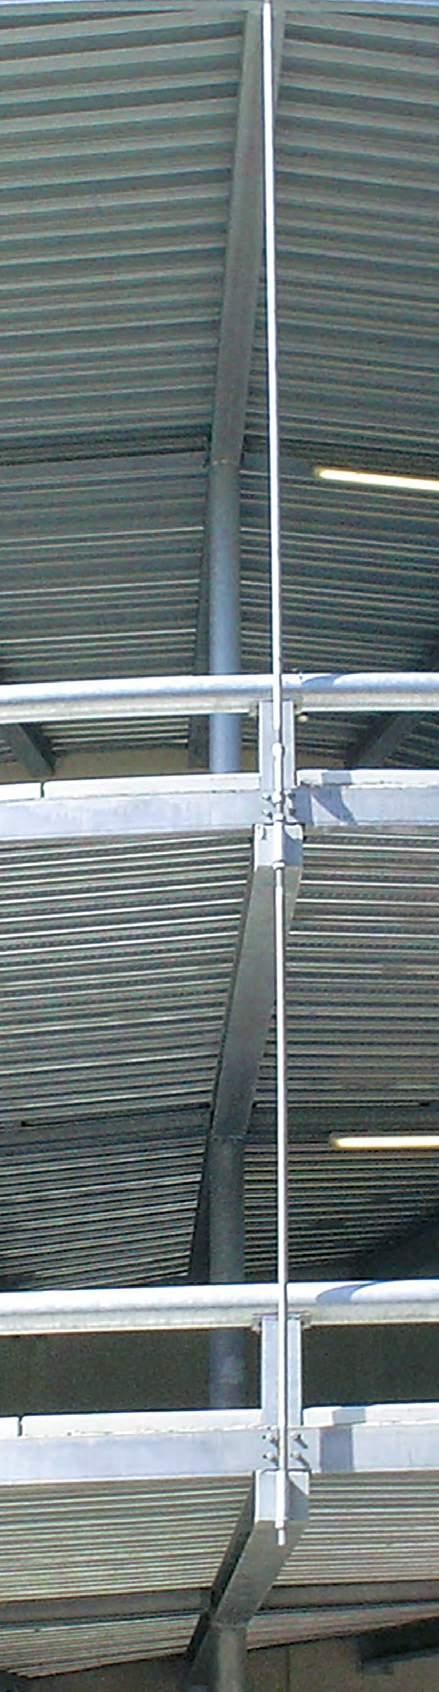 ComFlor 100 ComFlor 100 Strong long span composite profile for non-composite beams ComFlor 100 is a strong long span profile that reduces or eliminates temporary propping whether used on steel,